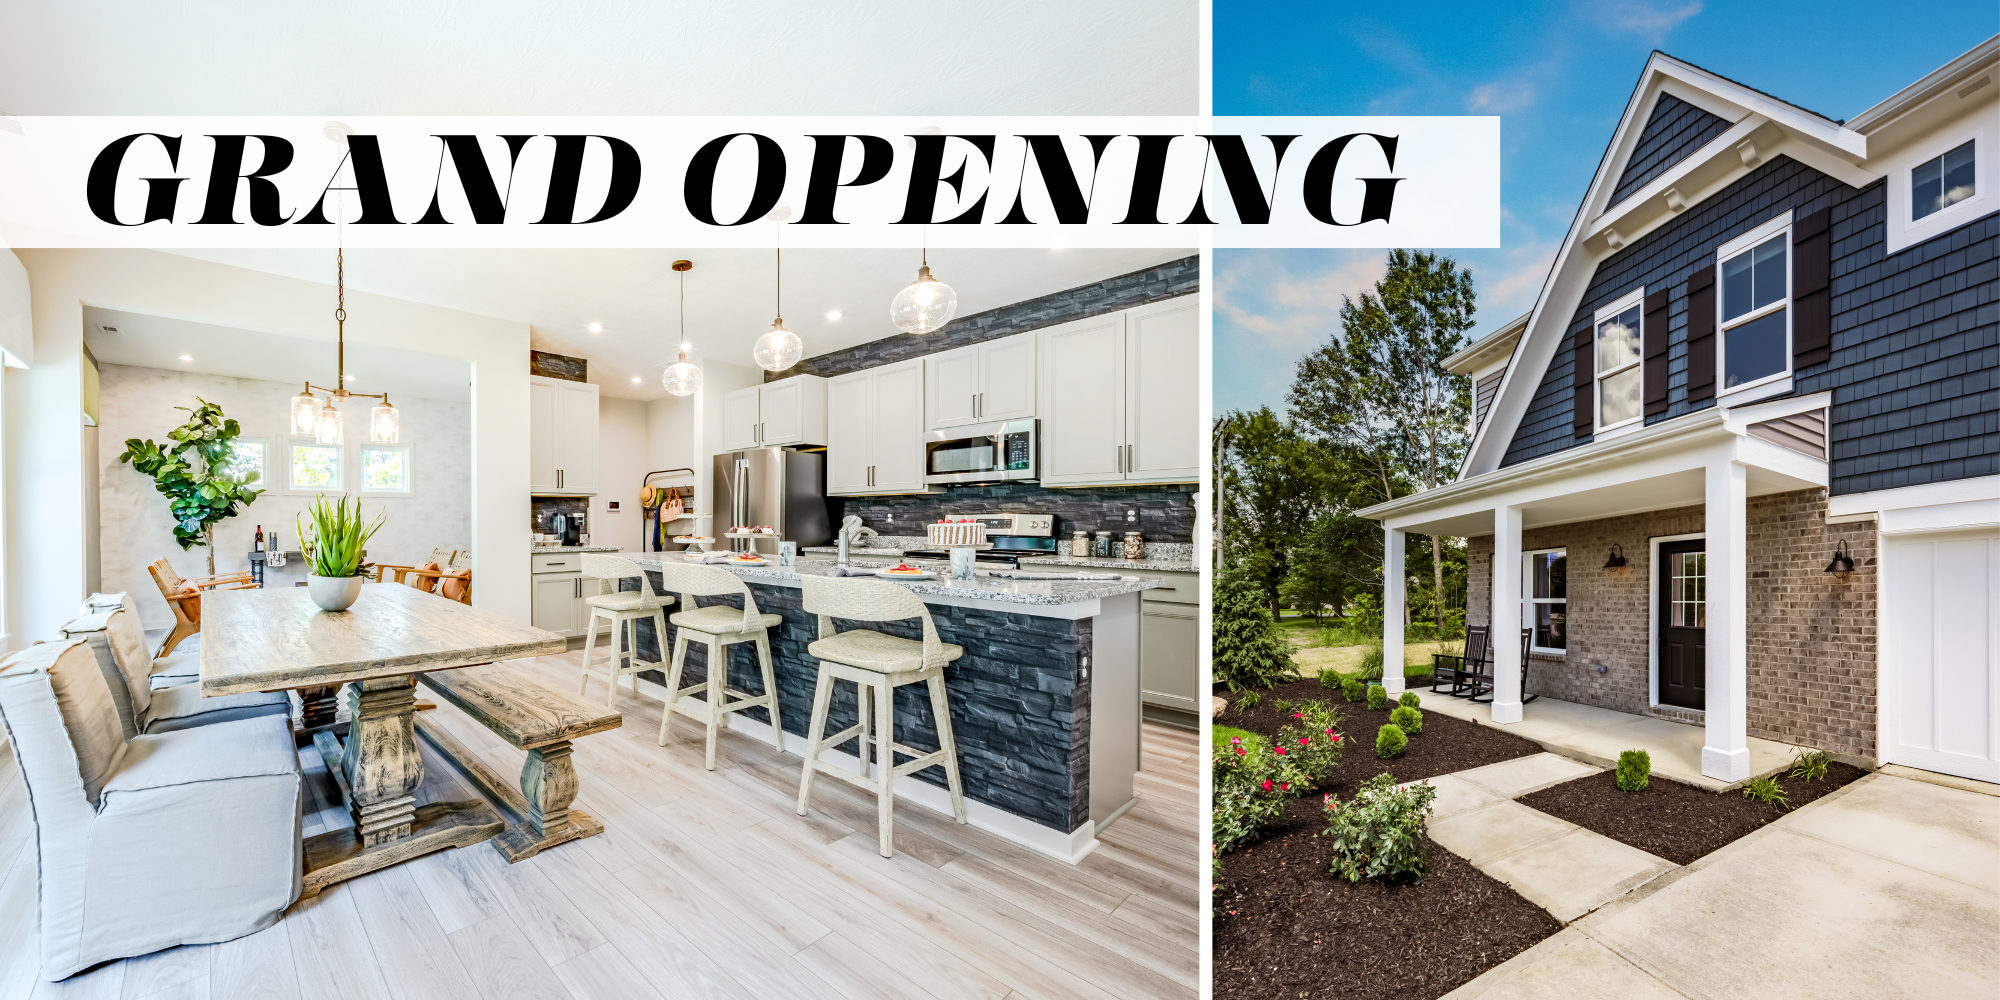 Join us for our Model Grand Opening Event in Mt. Washington